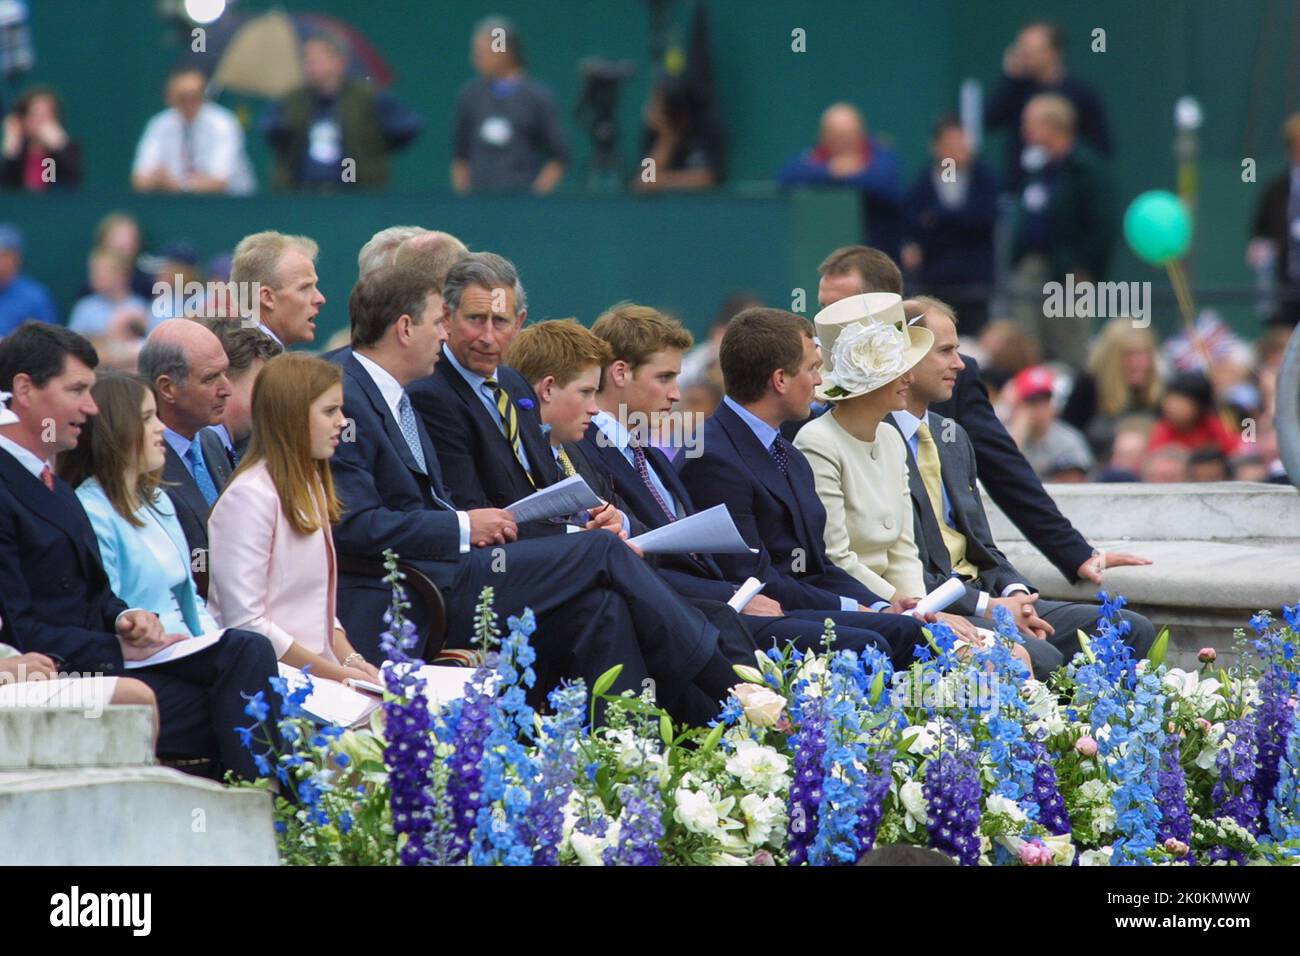 4th June 2002 - British Royal Family members at Golden Jubilee of Queen Elizabeth II in The Mall in London Stock Photo